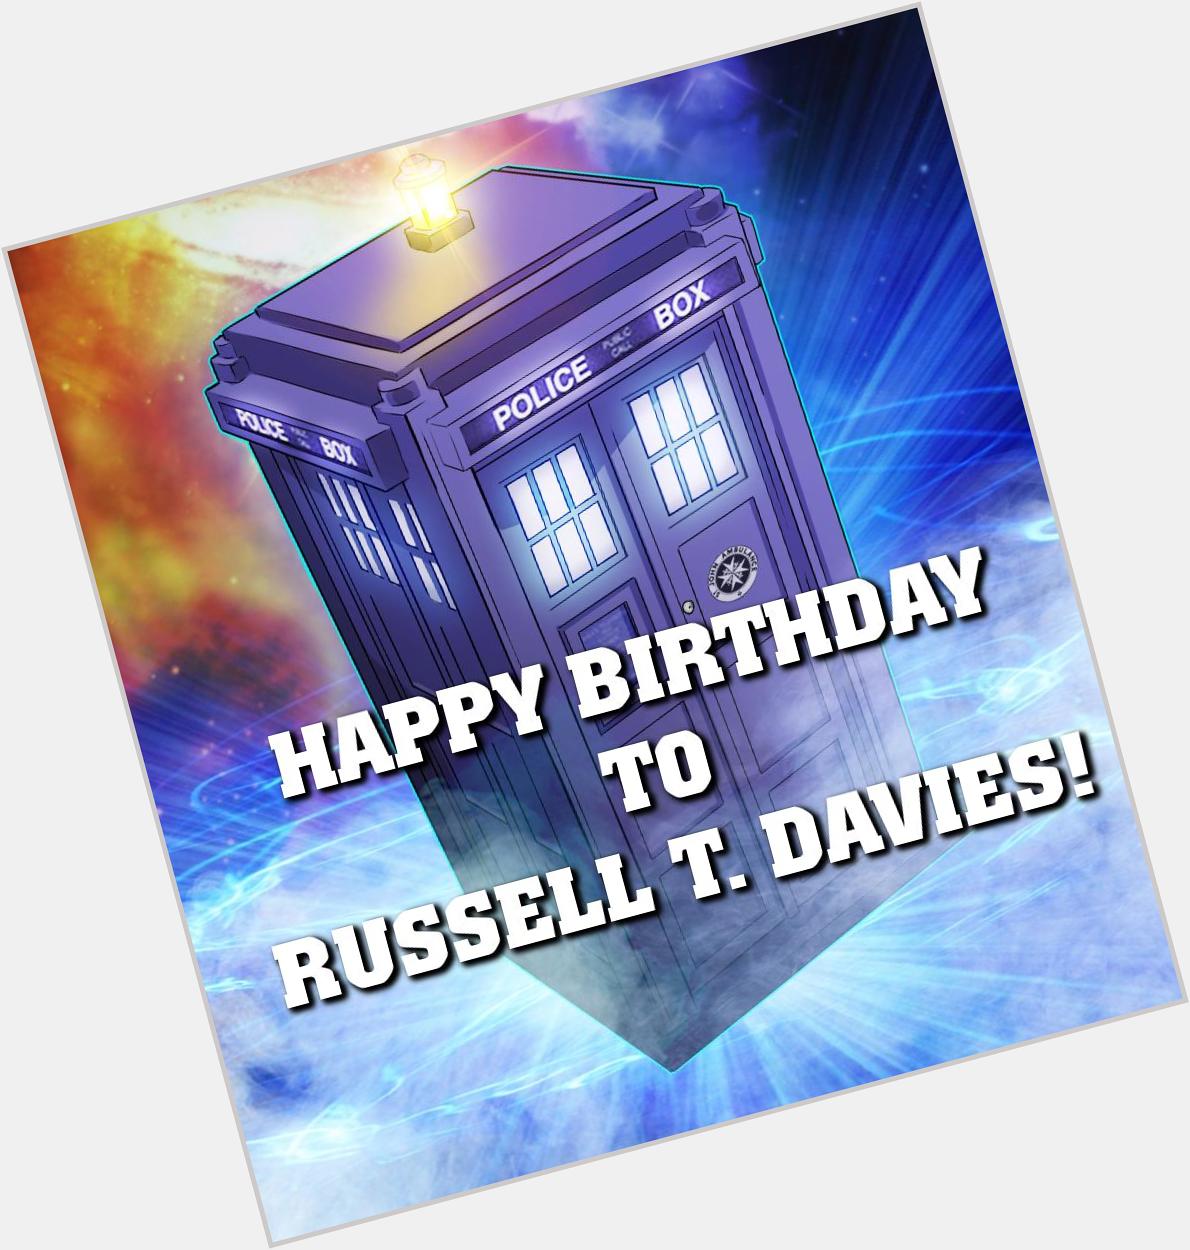 And a warm happy birthday to the amazing Russell T Davies! 